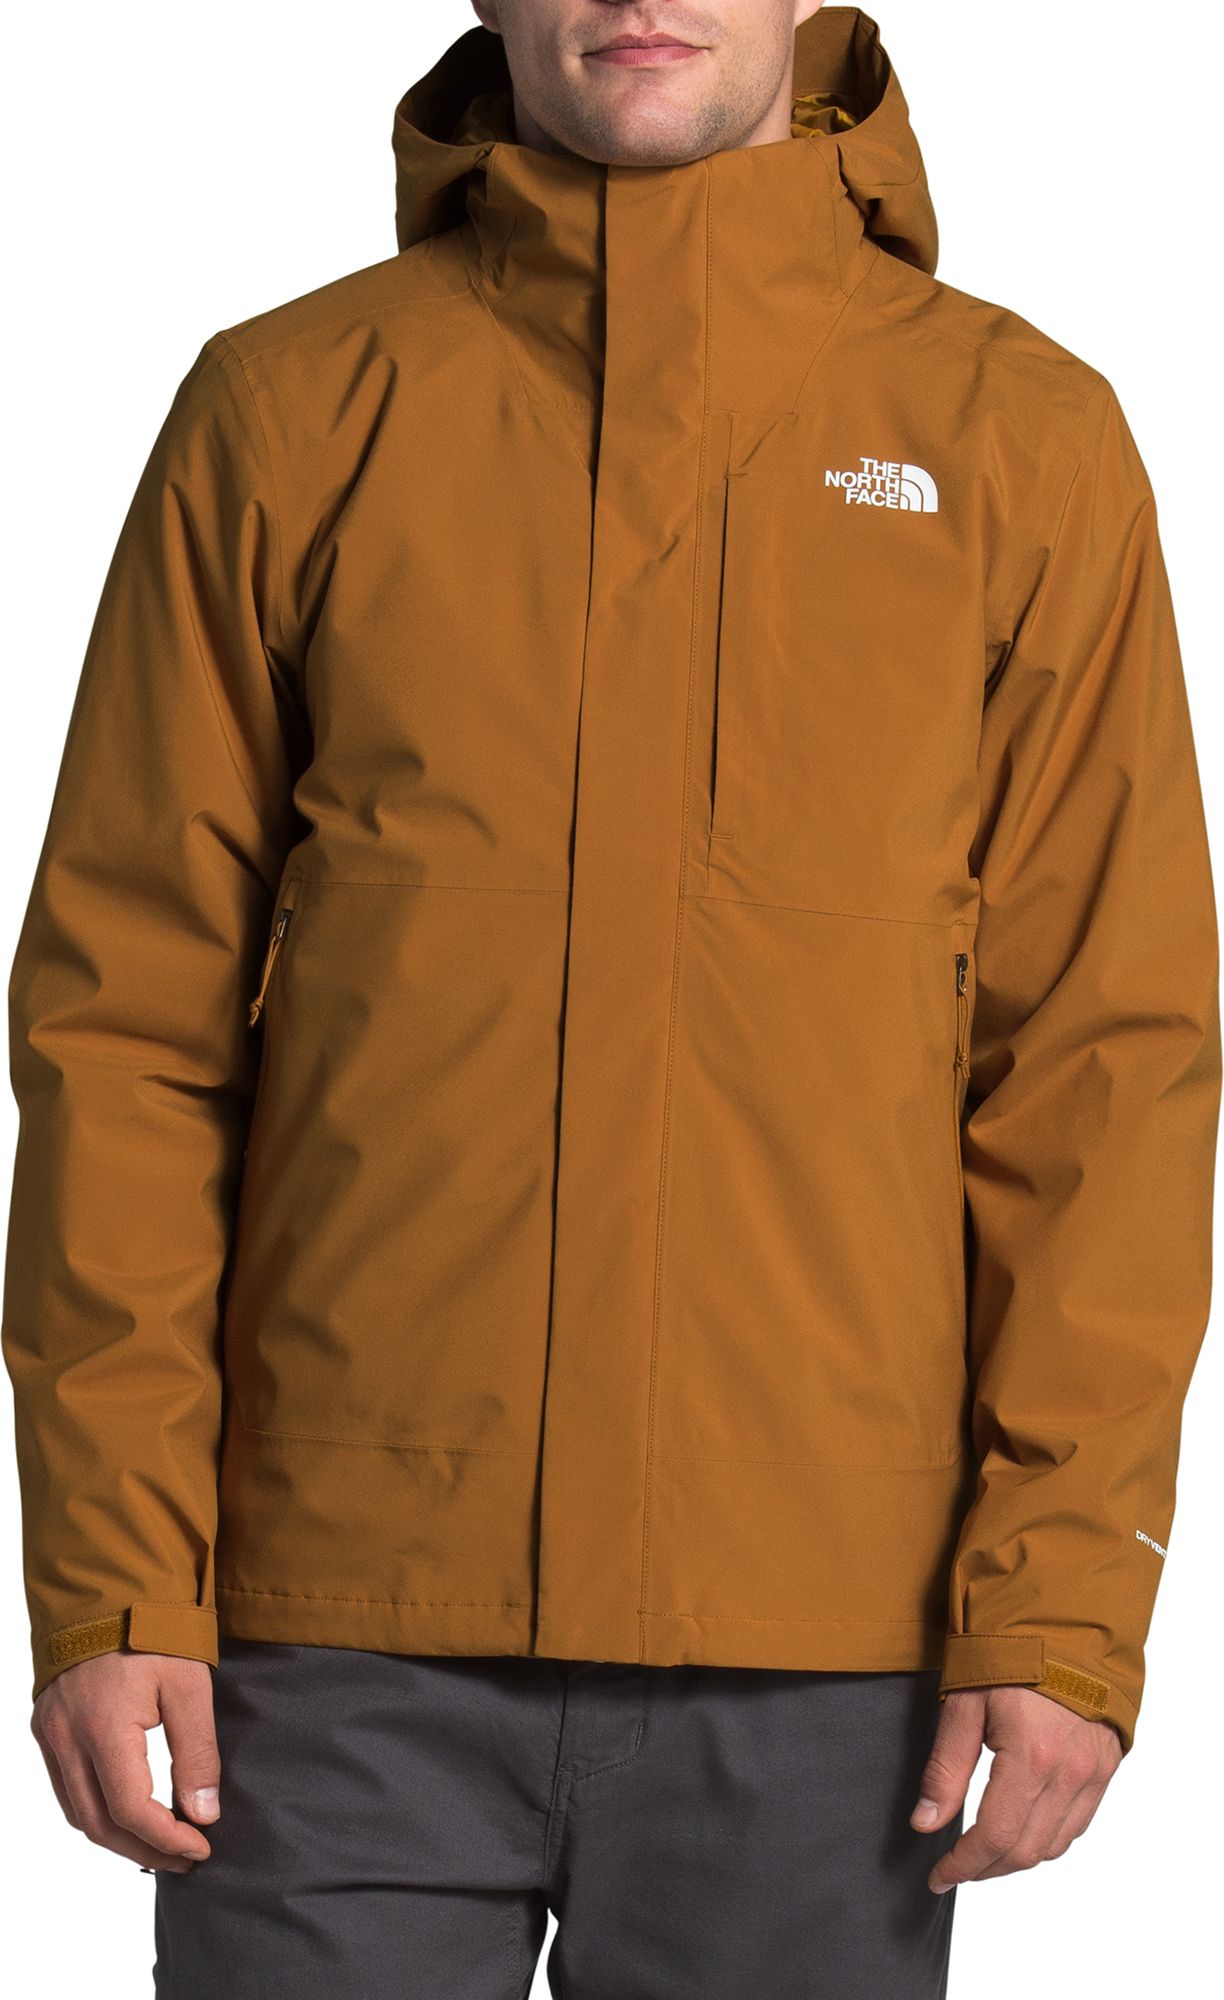 The North Face Tri Jacket Best Sale, 53% OFF | www.alforja.cat